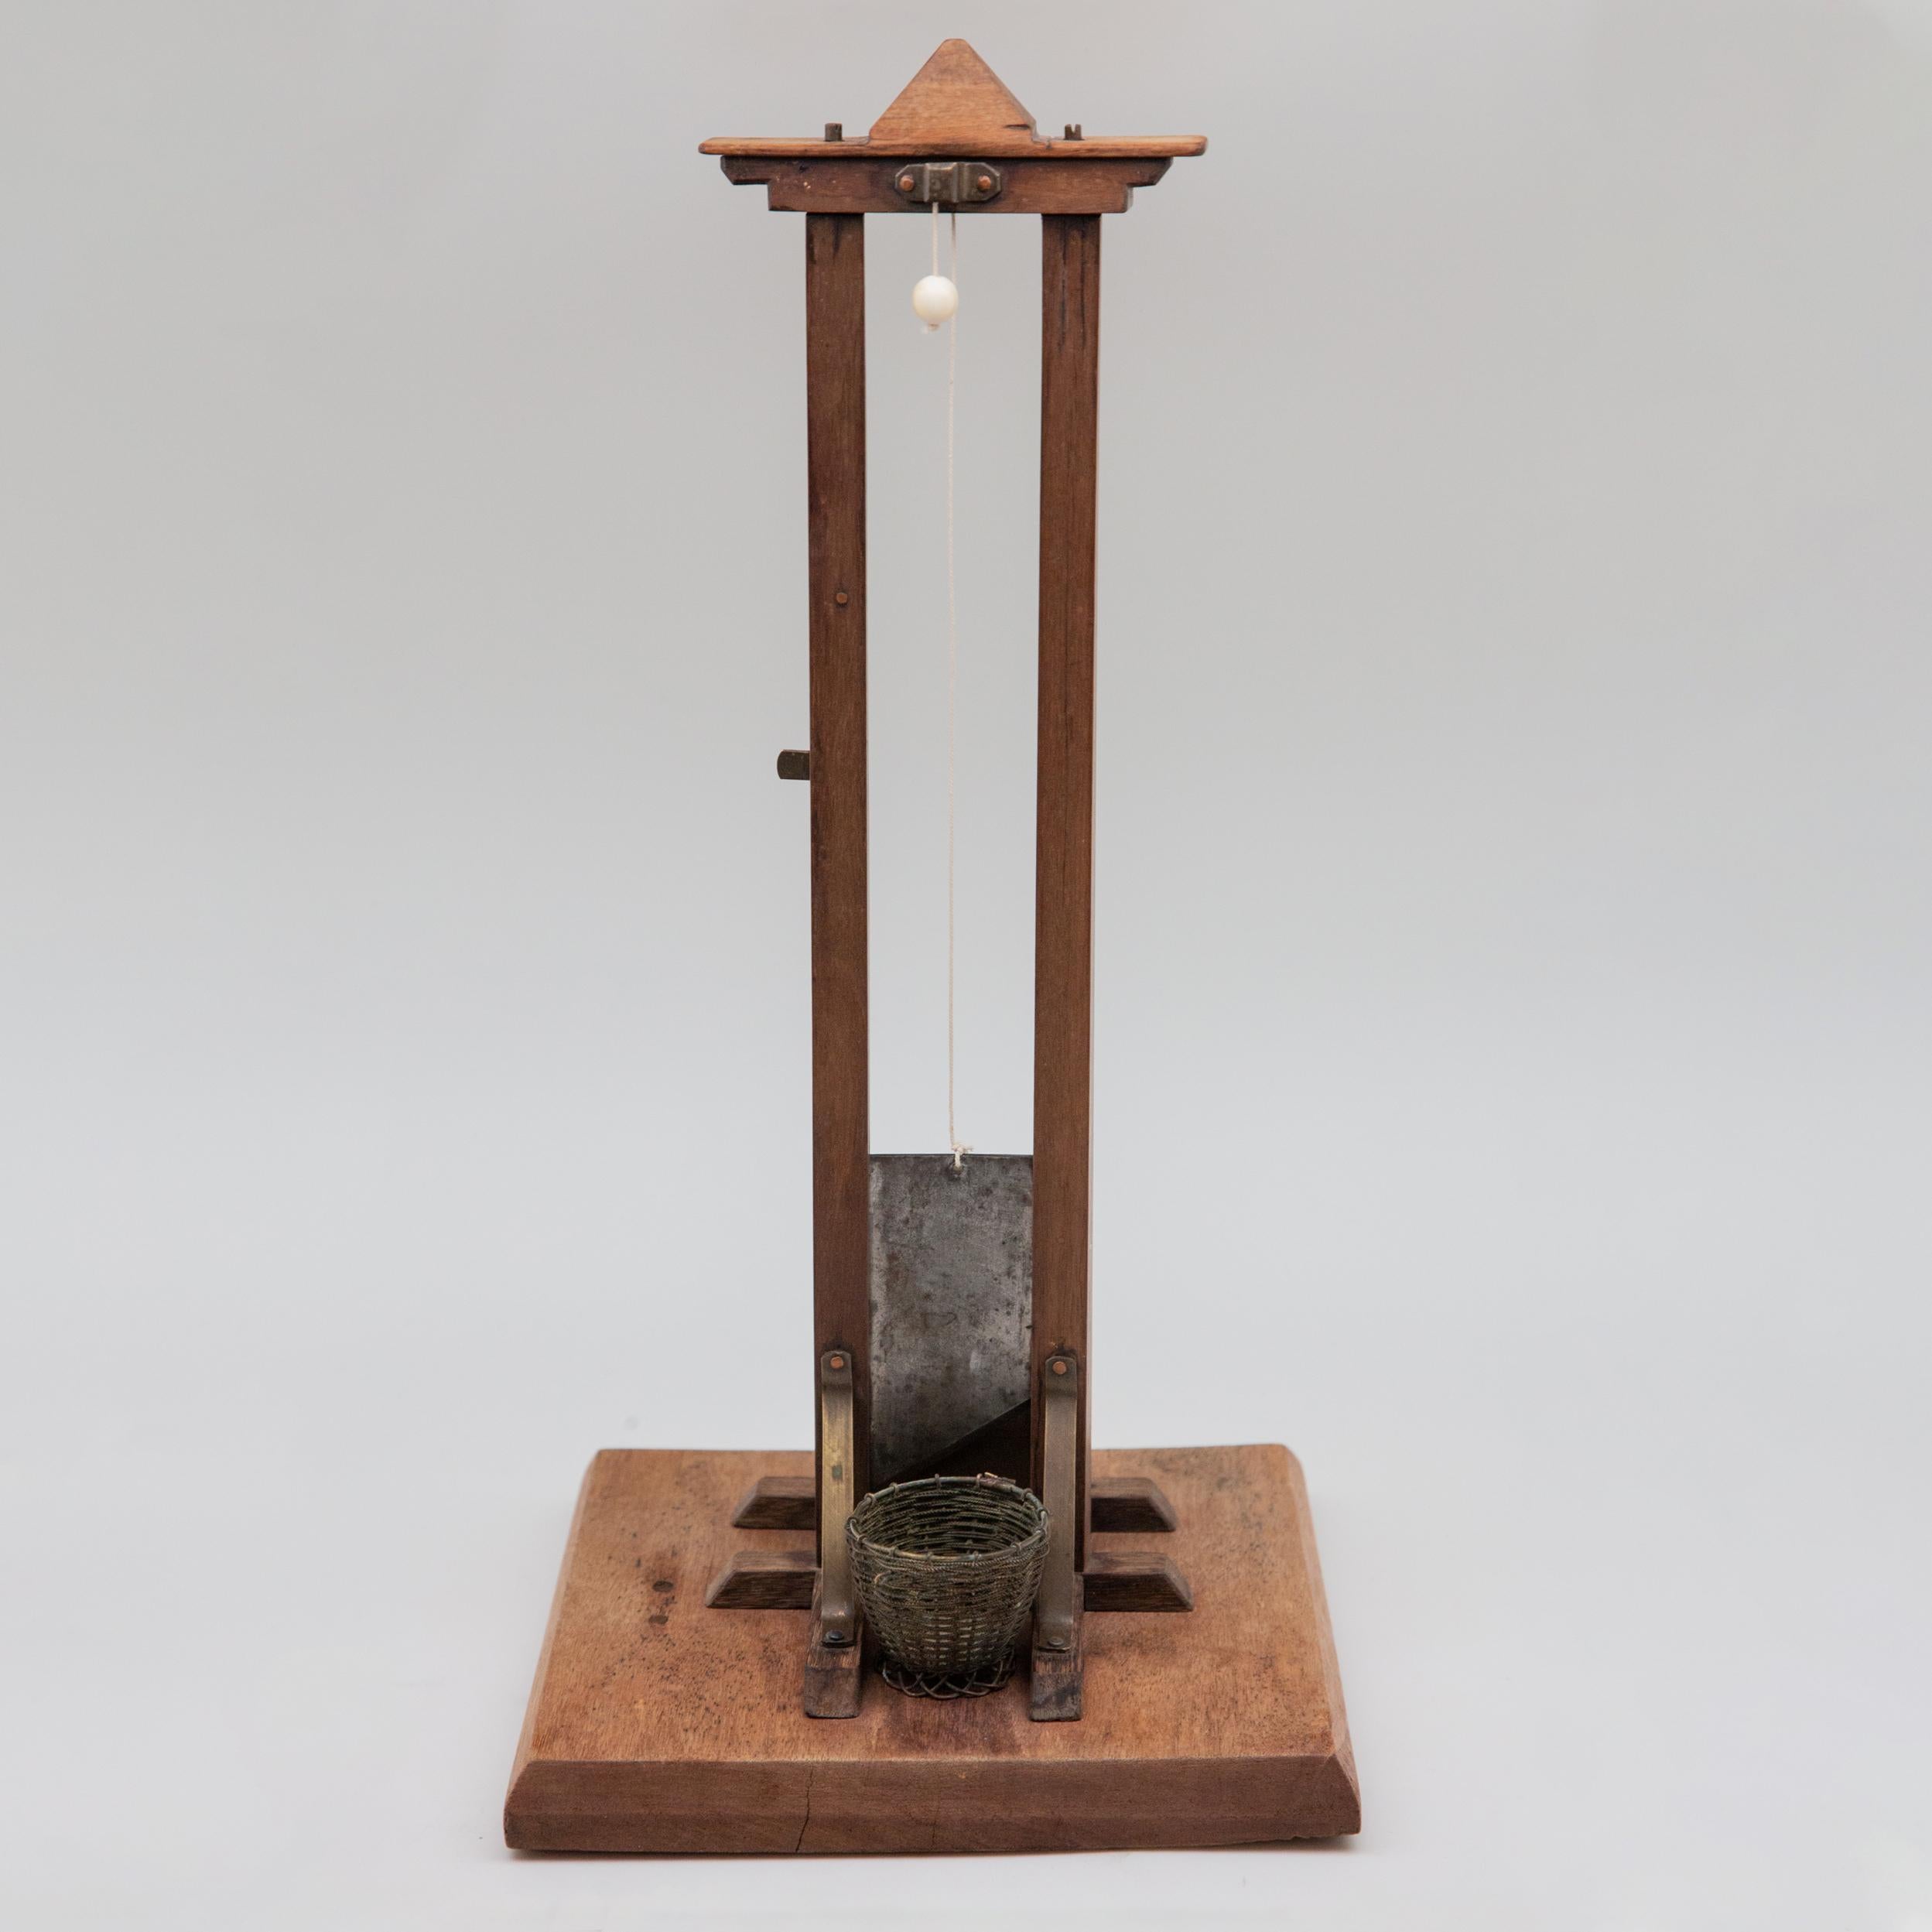 19th century tall miniature Guillotine cigar cutter. Antique miniature Guillotine cigar cutter cigar tip basket, French late 19th-early 20th century. It was in 1789, when the physician Joseph-Ignace Guillotin, recommended the use of this type of